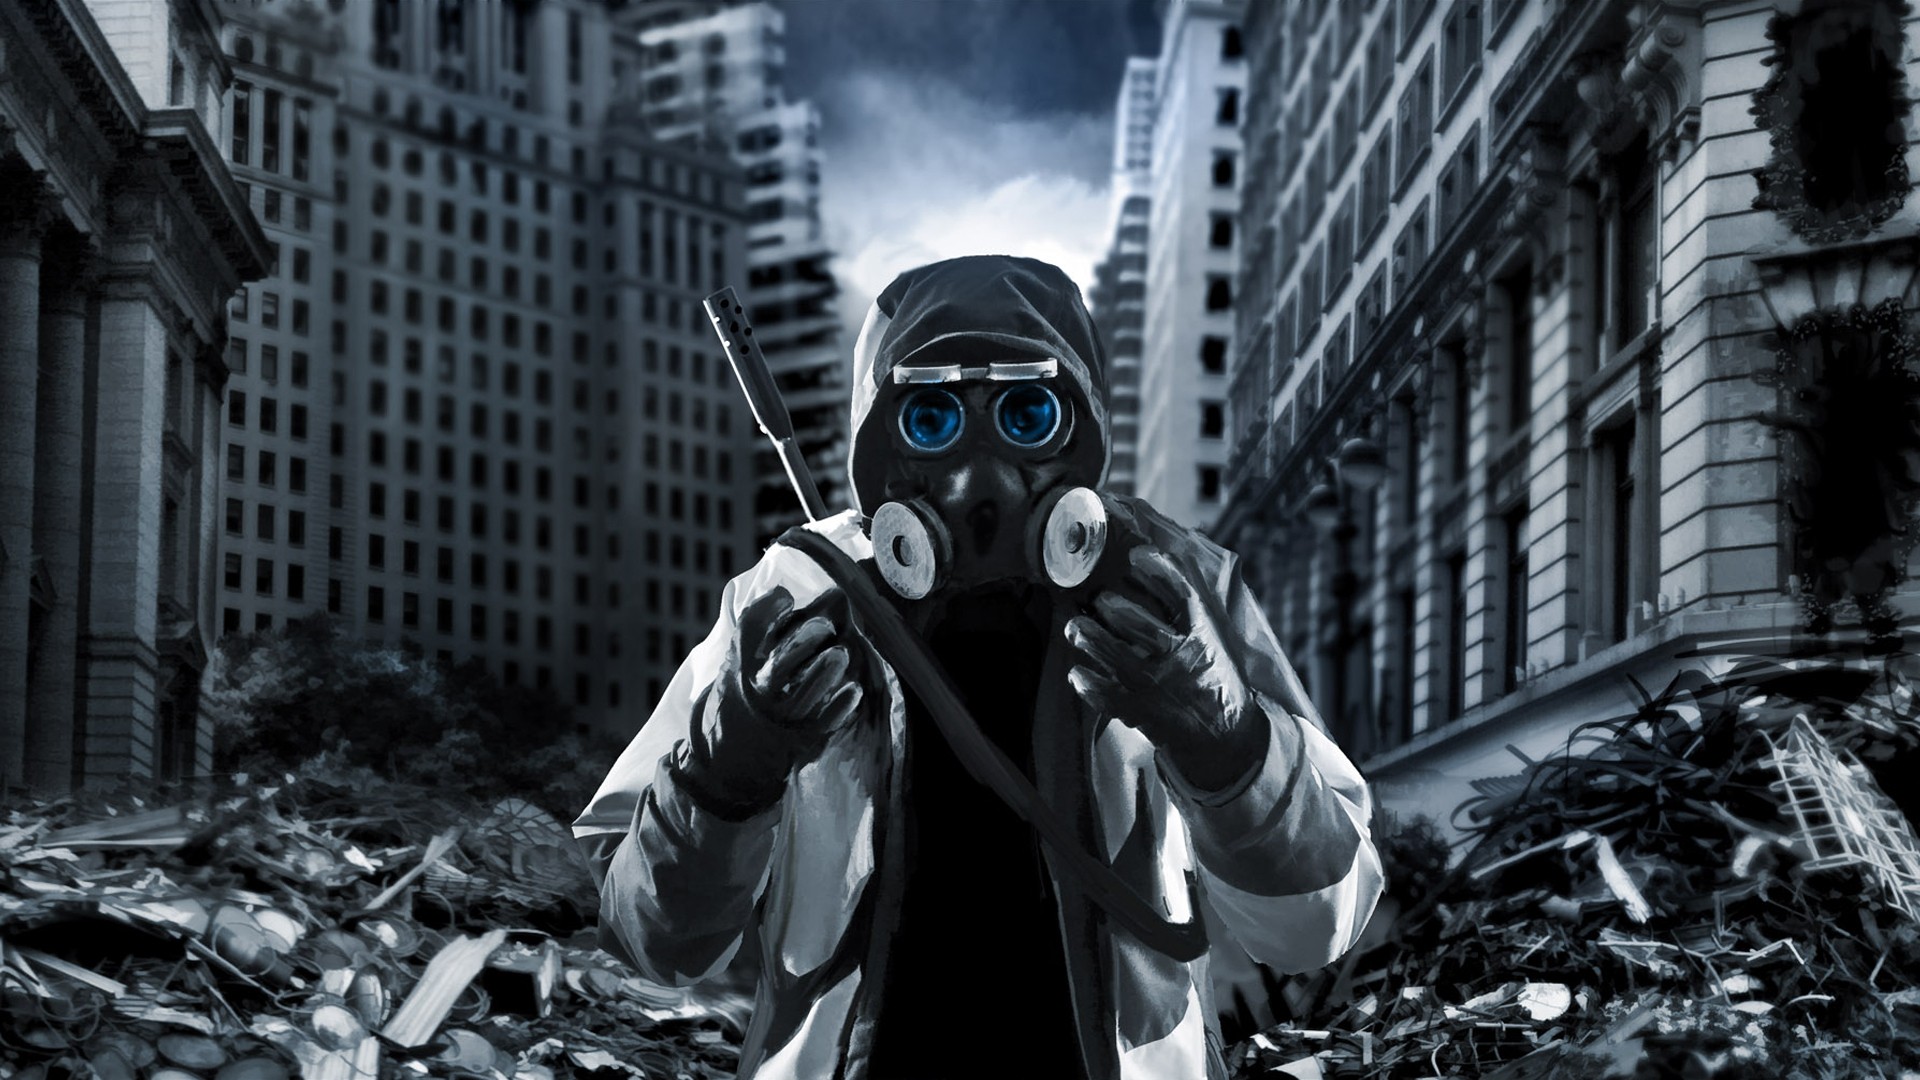 gas Masks, Gone With The Blastwave, Destruction, Romantically Apocalyptic Wallpaper